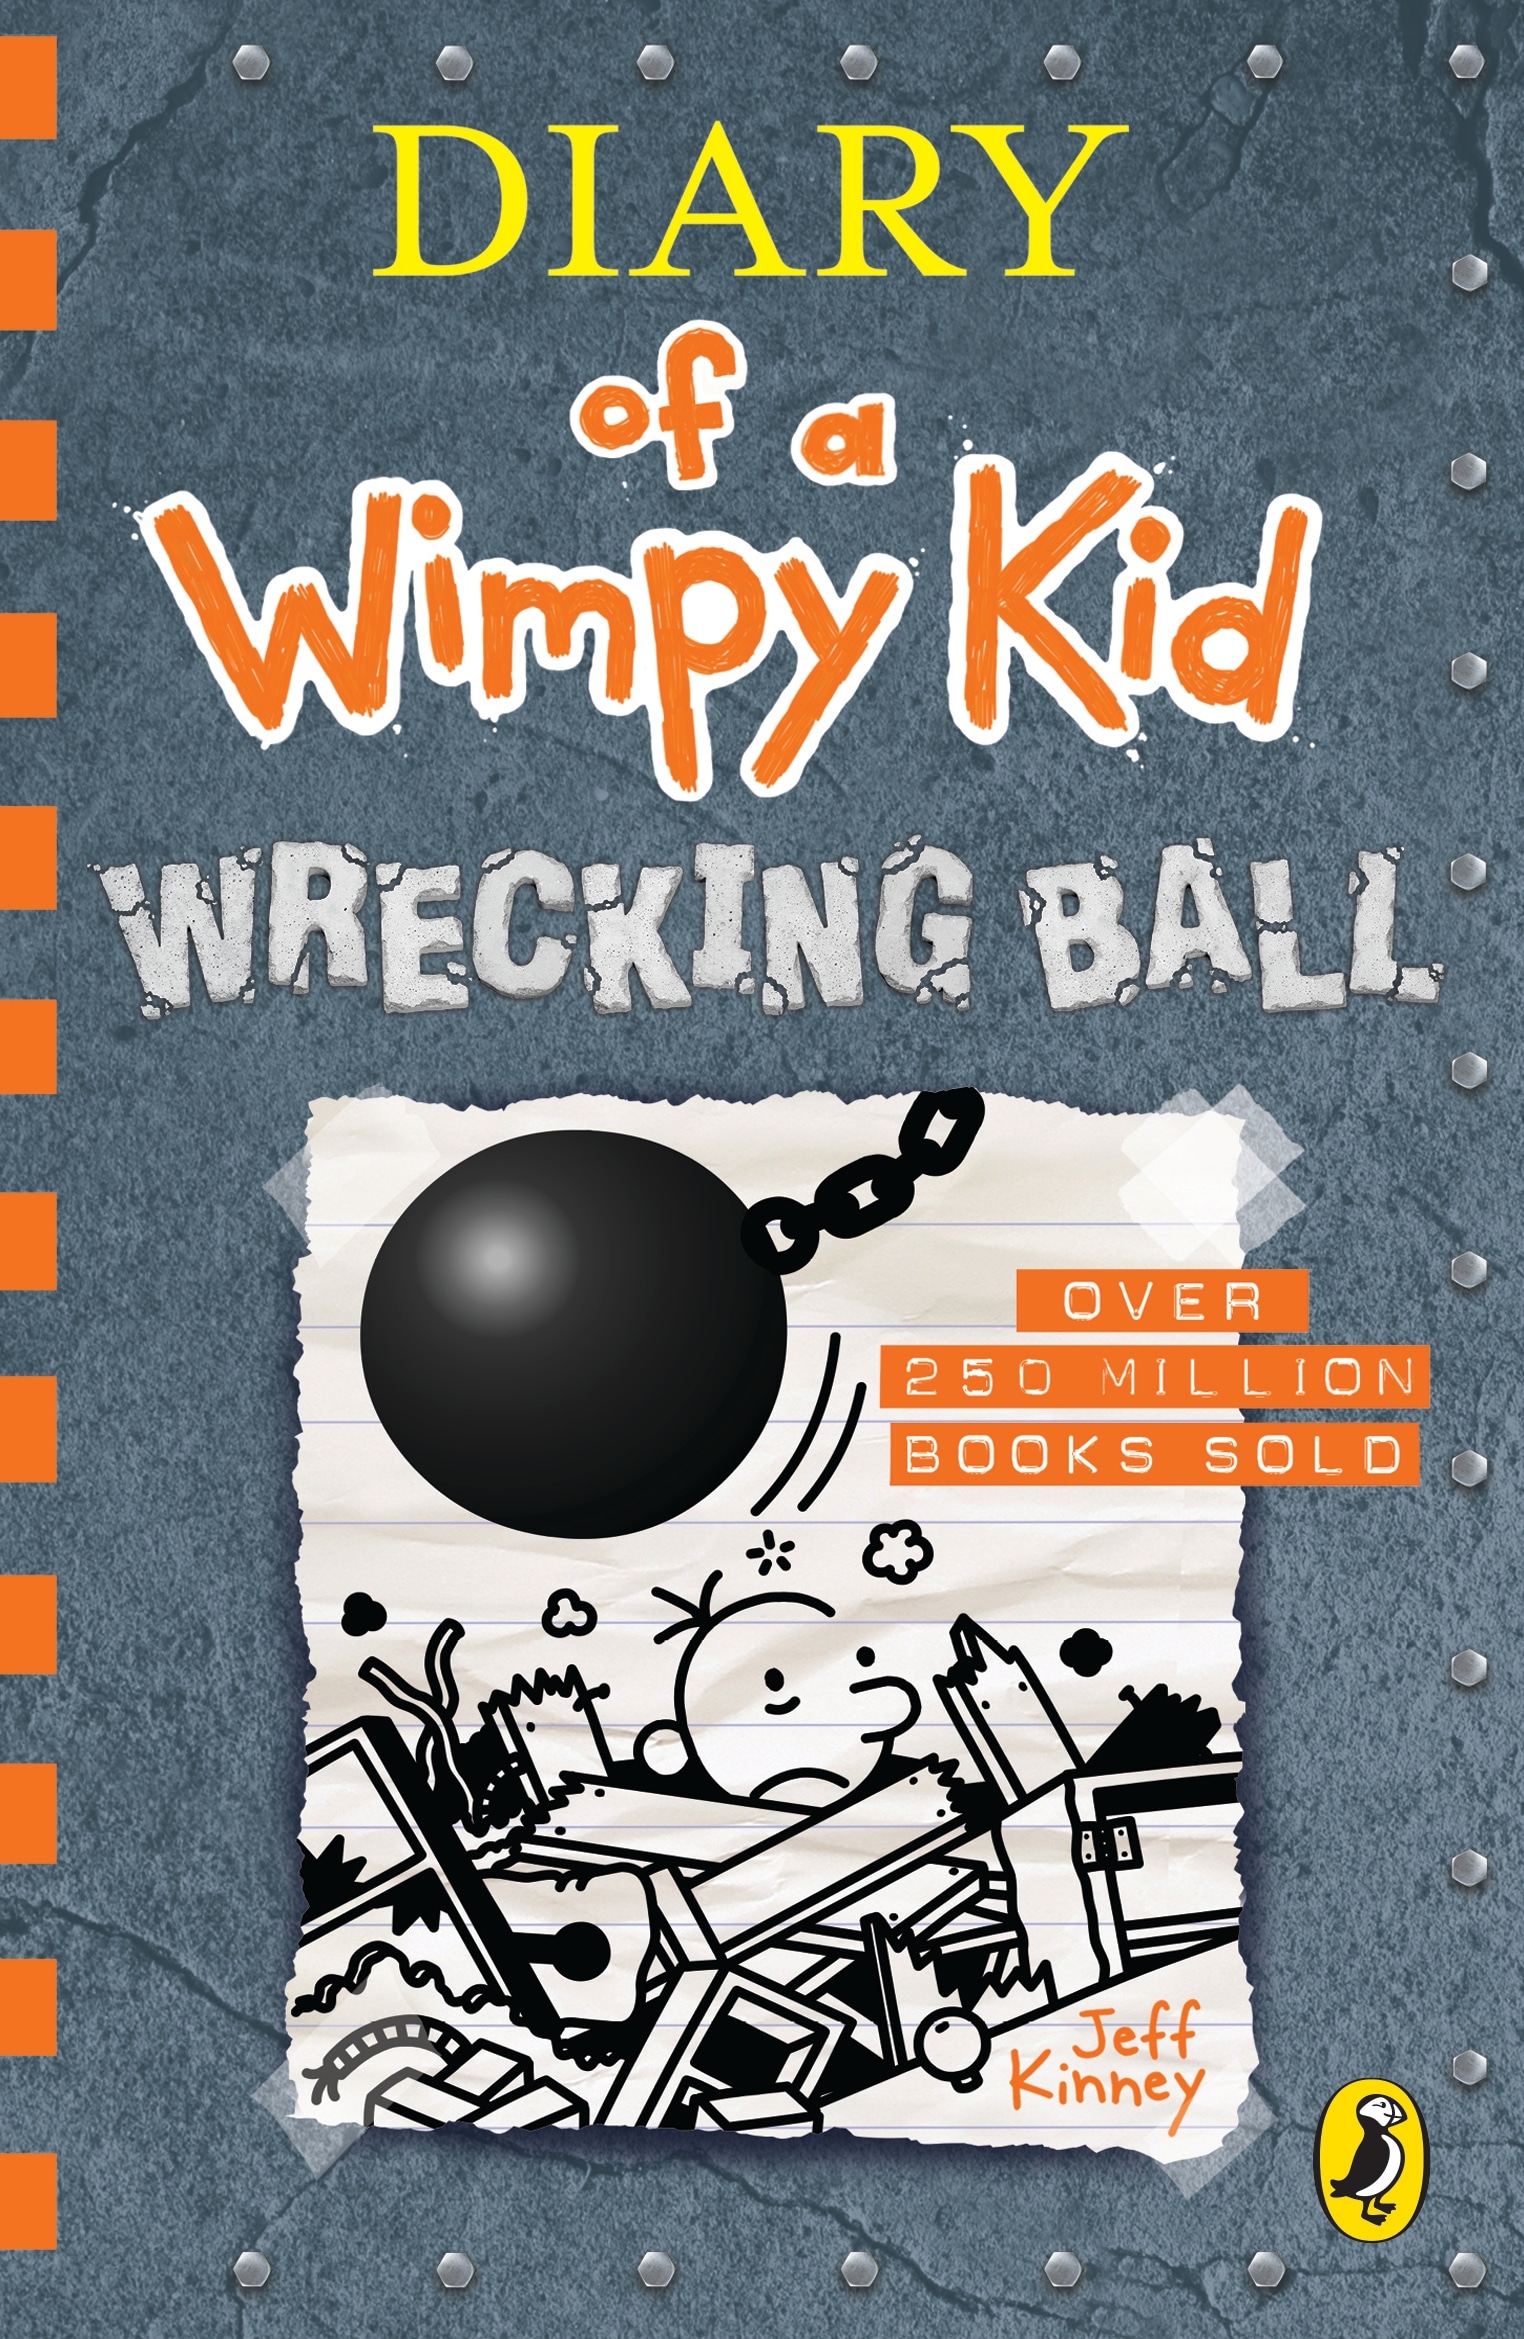 Book “Diary of a Wimpy Kid: Wrecking Ball (Book 14)” by Jeff Kinney — January 21, 2021